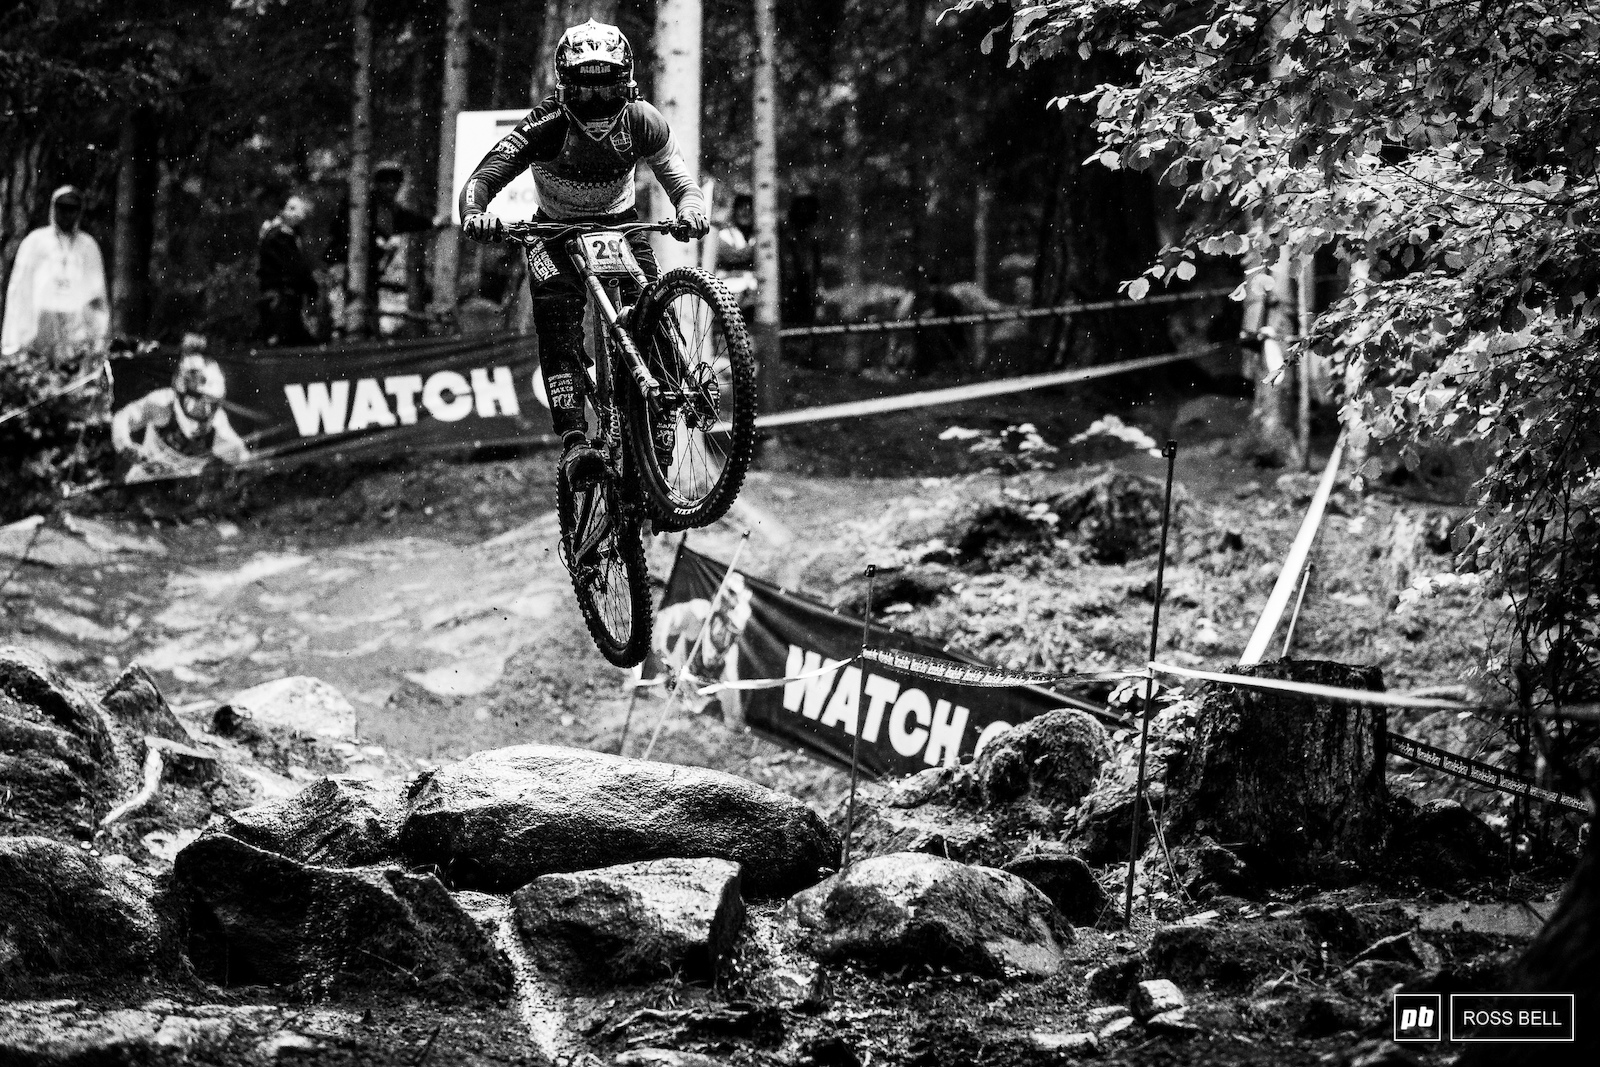 Alex Marin was one of the only riders to still send this gap through the rock garden in the wet.